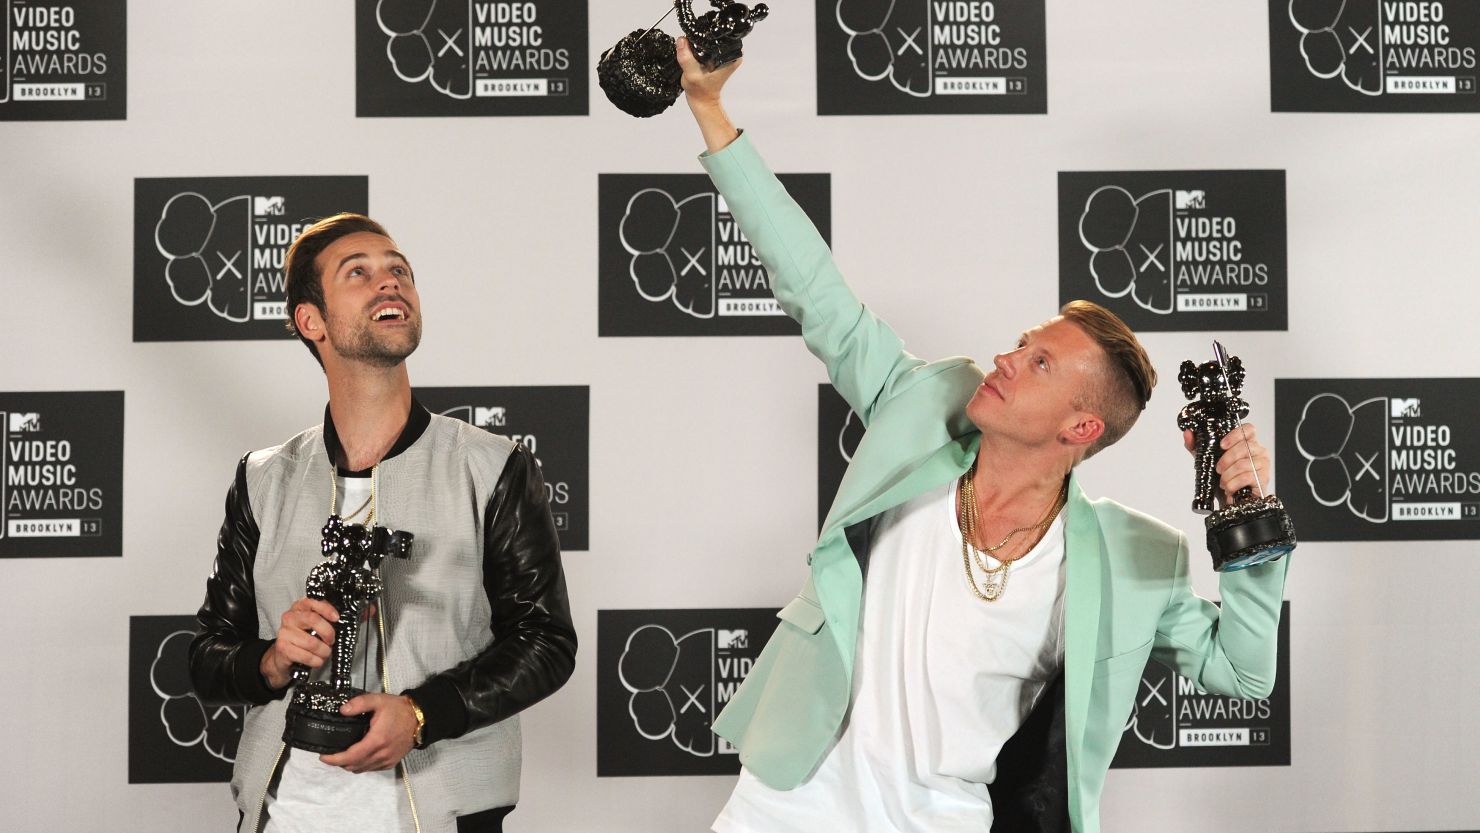 Ryan Lewis and Macklemore attend the 2013 MTV Video Music Awards at the Barclays Center on August 25, 2013 in New York City. 